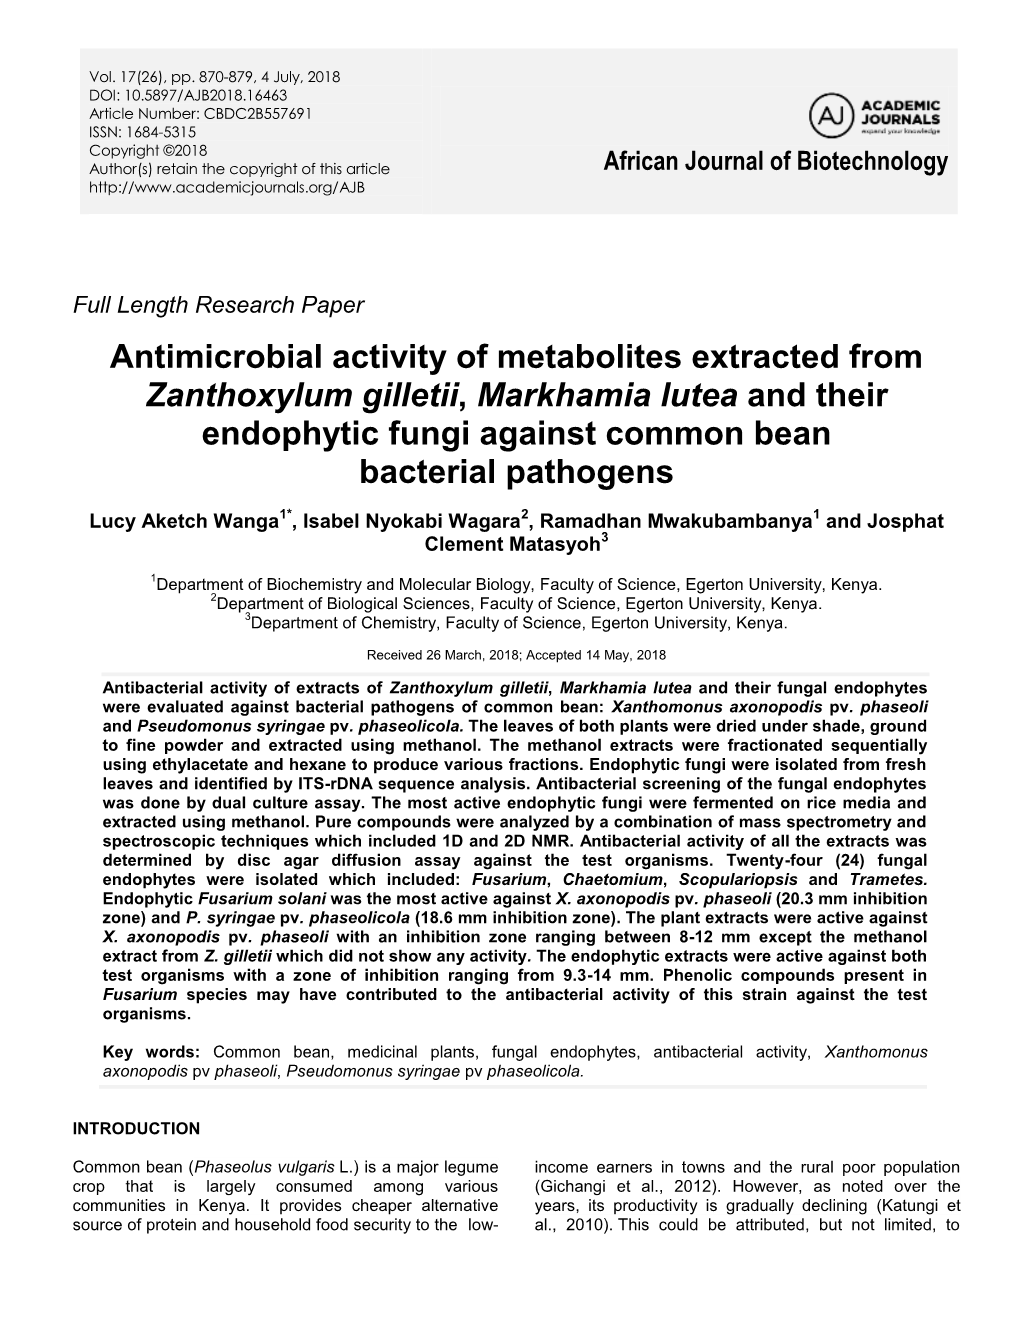 Antimicrobial Activity of Metabolites Extracted from Zanthoxylum Gilletii, Markhamia Lutea and Their Endophytic Fungi Against Common Bean Bacterial Pathogens